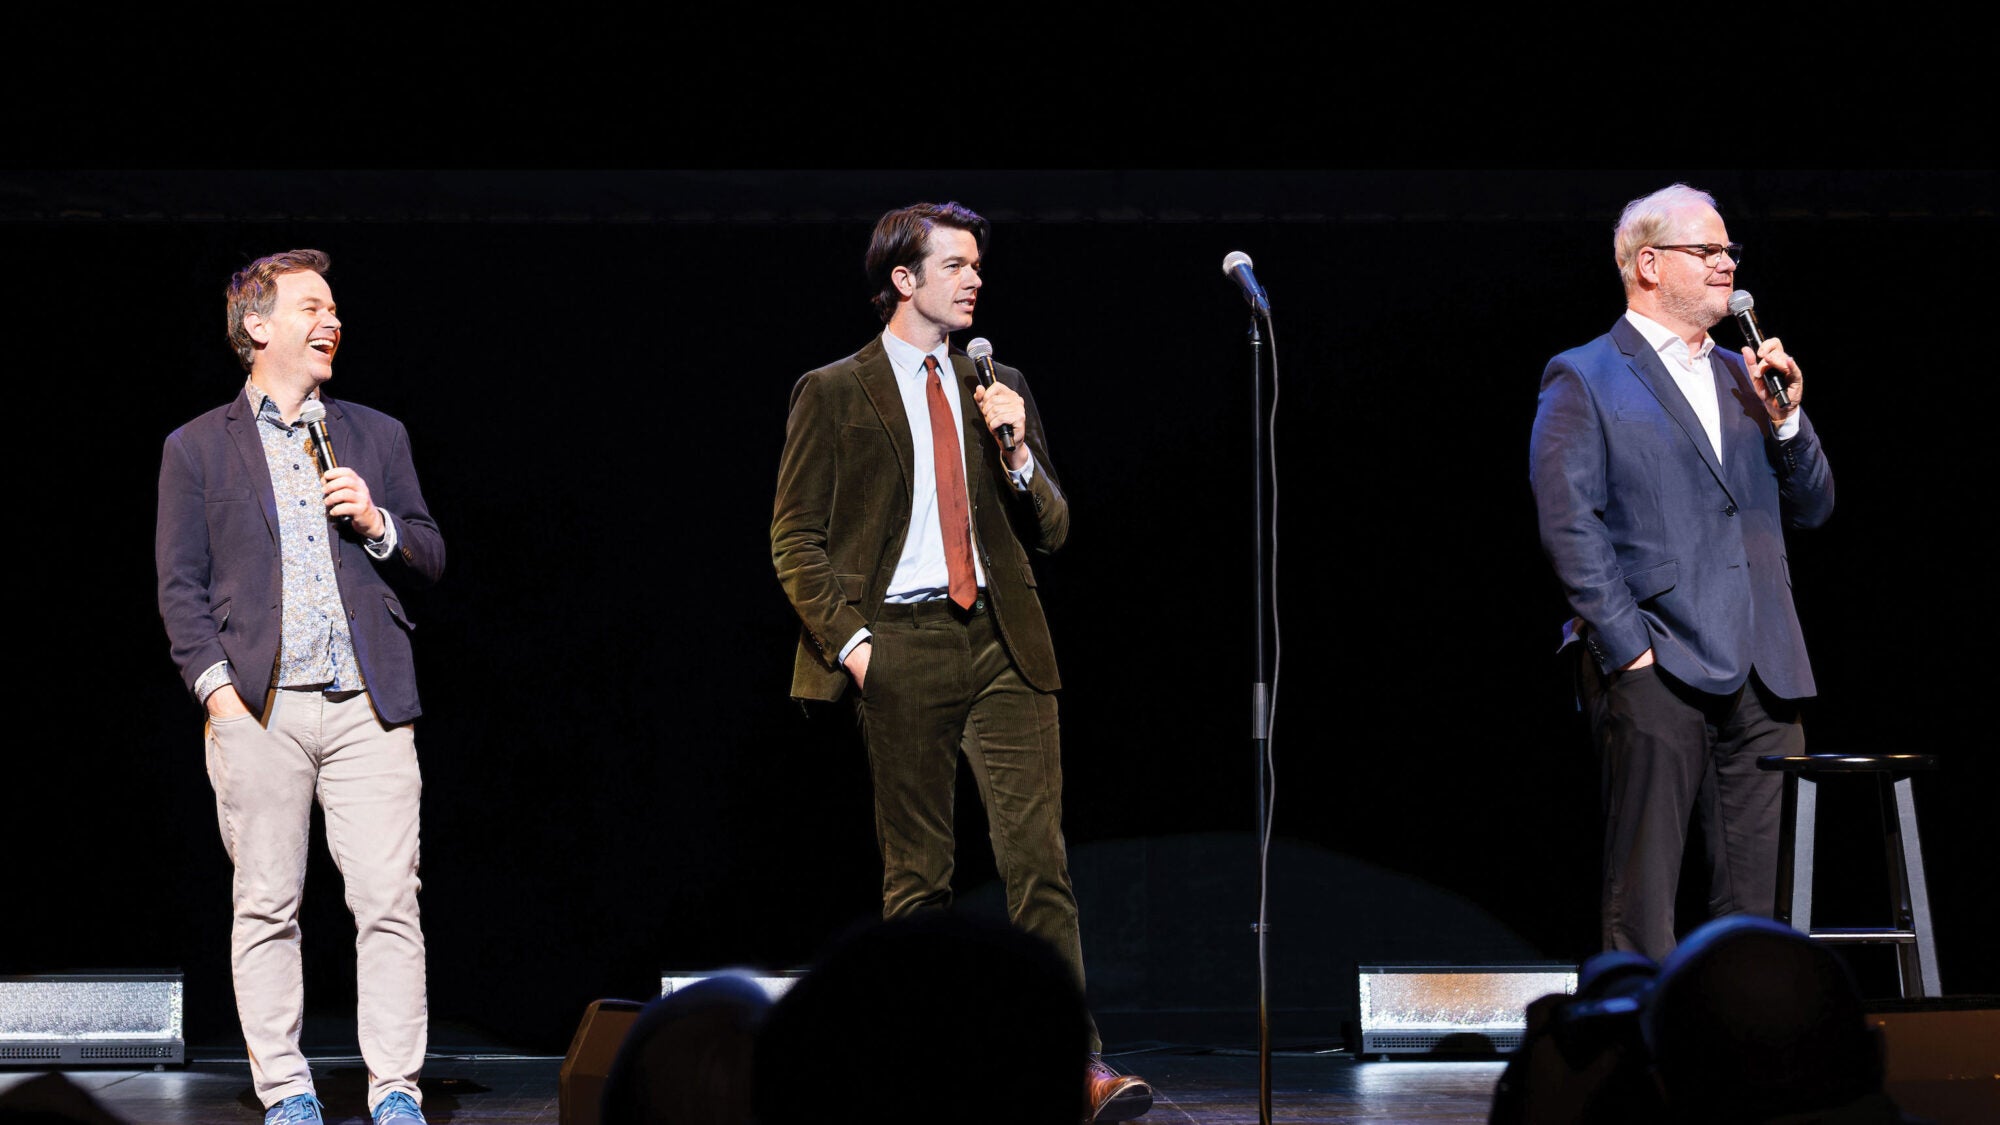 Comedians Mike Birbiglia (C’00), John Mulaney (C’04), and Jim Gaffigan (B’88, Parent’26) perform to a sold-out crowd at the second annual Stand Up for Georgetown fundraising event. | Photo: Jonathan Heisler